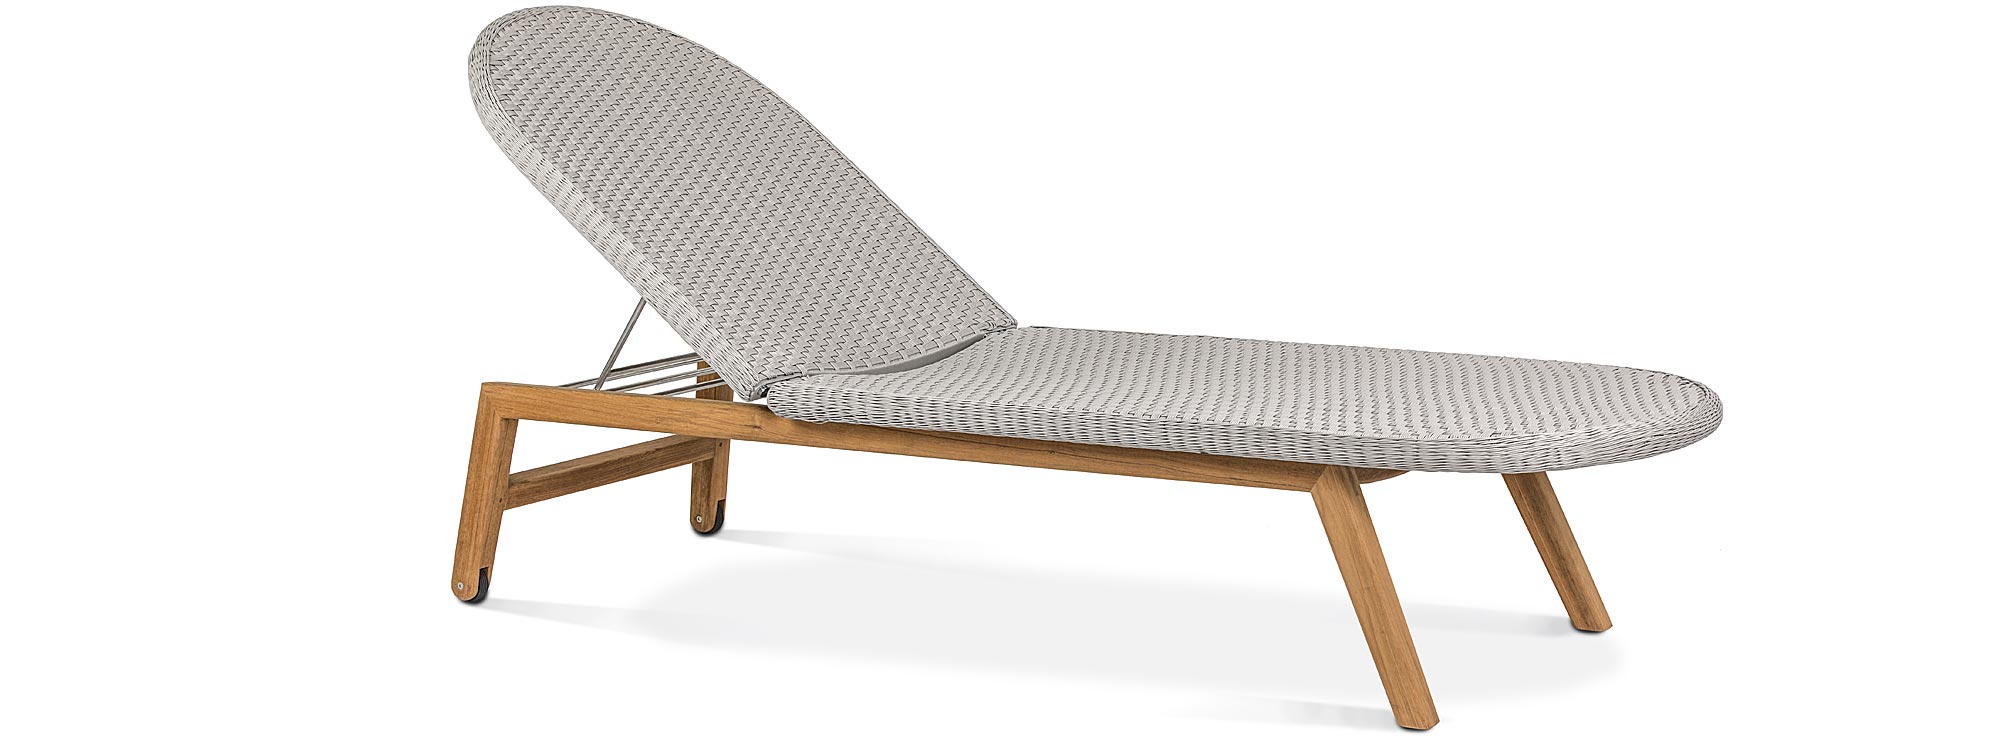 Shell Teak modern sun lounger is a luxury adjustable sunbed in quality outdoor furniture materials by FueraDentro contemporary garden furniture